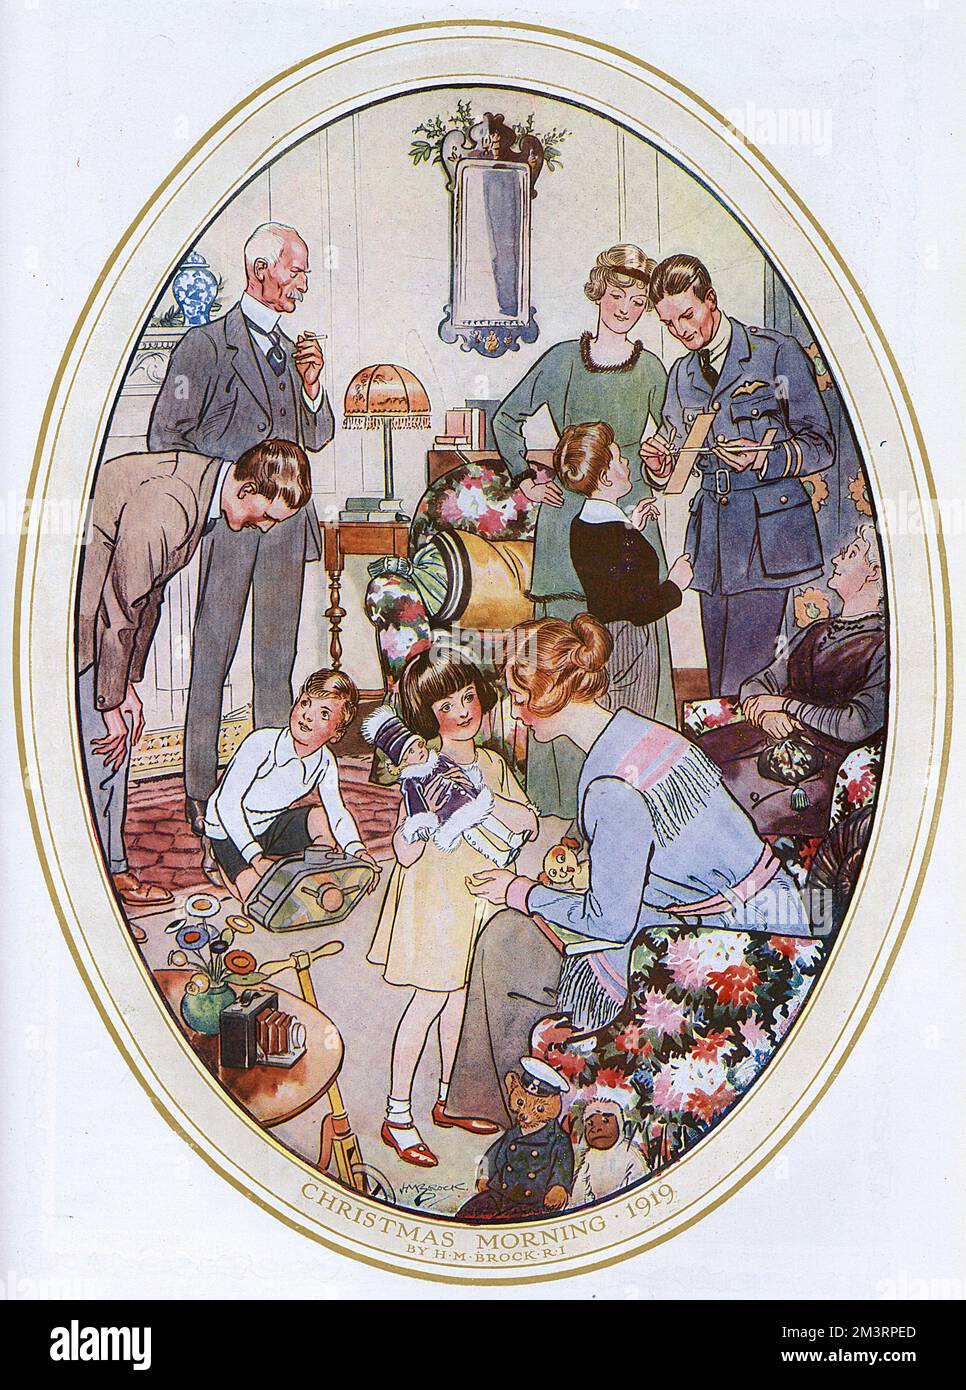 Impression of Christmas morning 1919 by H. M. Brock, the counterpart of an illustration done by H. M. Brock's brother, C. E. Brock of a Victorian Christmas morning in 1869.  The two pictures were commissioned by The Graphic and appeared in its Christmas Number 1919, which celebrated the magazine's fiftieth anniversary.  Its first issue launched on 4th December 1869.  Note the Christmas presents enjoyed by the family's children - a tank, a plane and a teddy dressed in a Royal Navy uniform feature - indicating the period, immediately after the First World War.  See picture number 11936741 for th Stock Photo